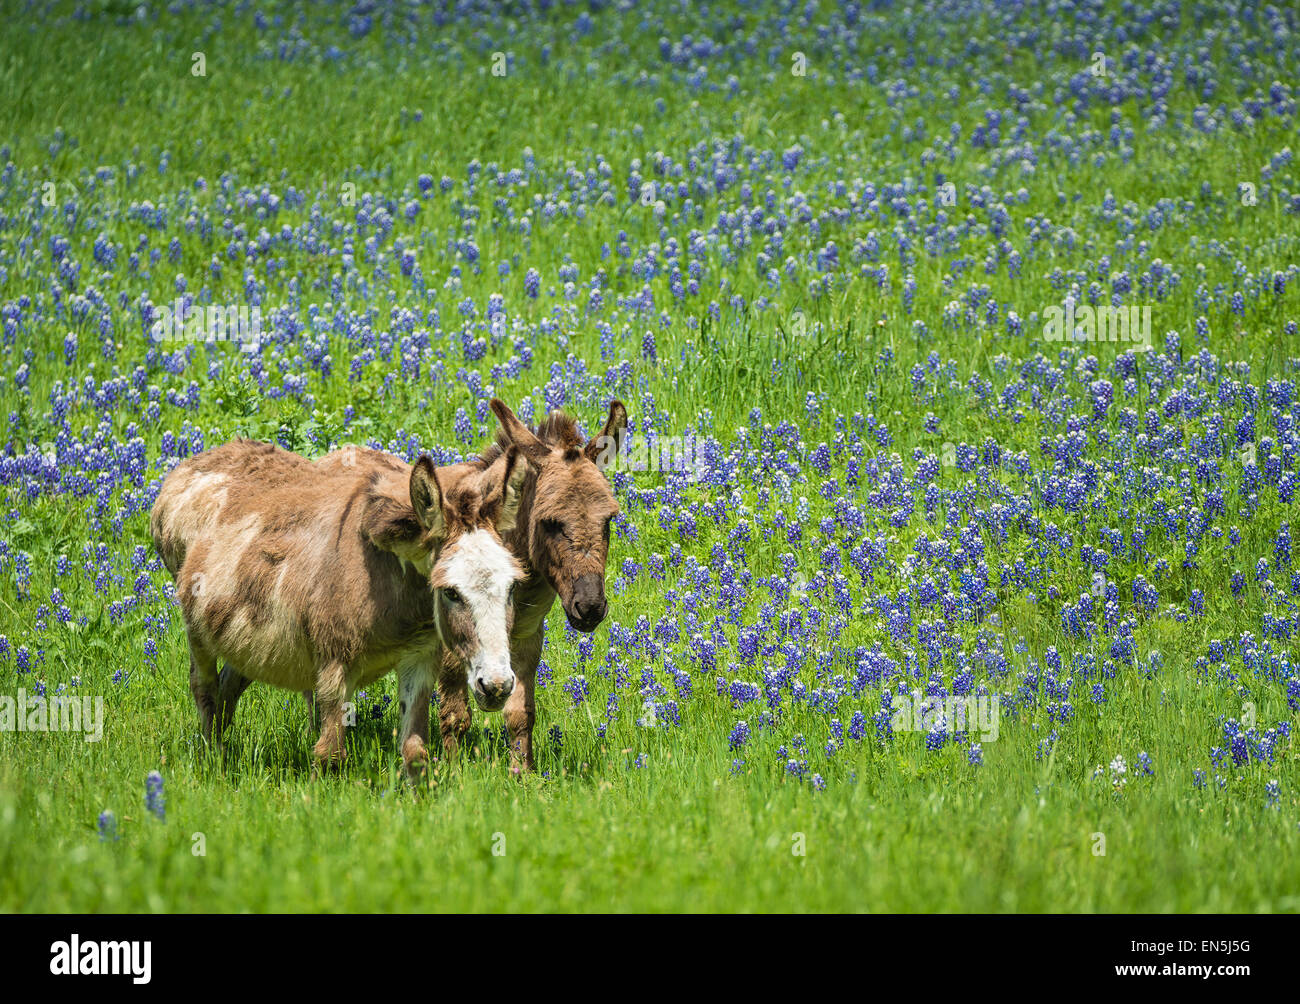 Two donkeys grazing on bluebonnet pasture in Texas spring Stock Photo